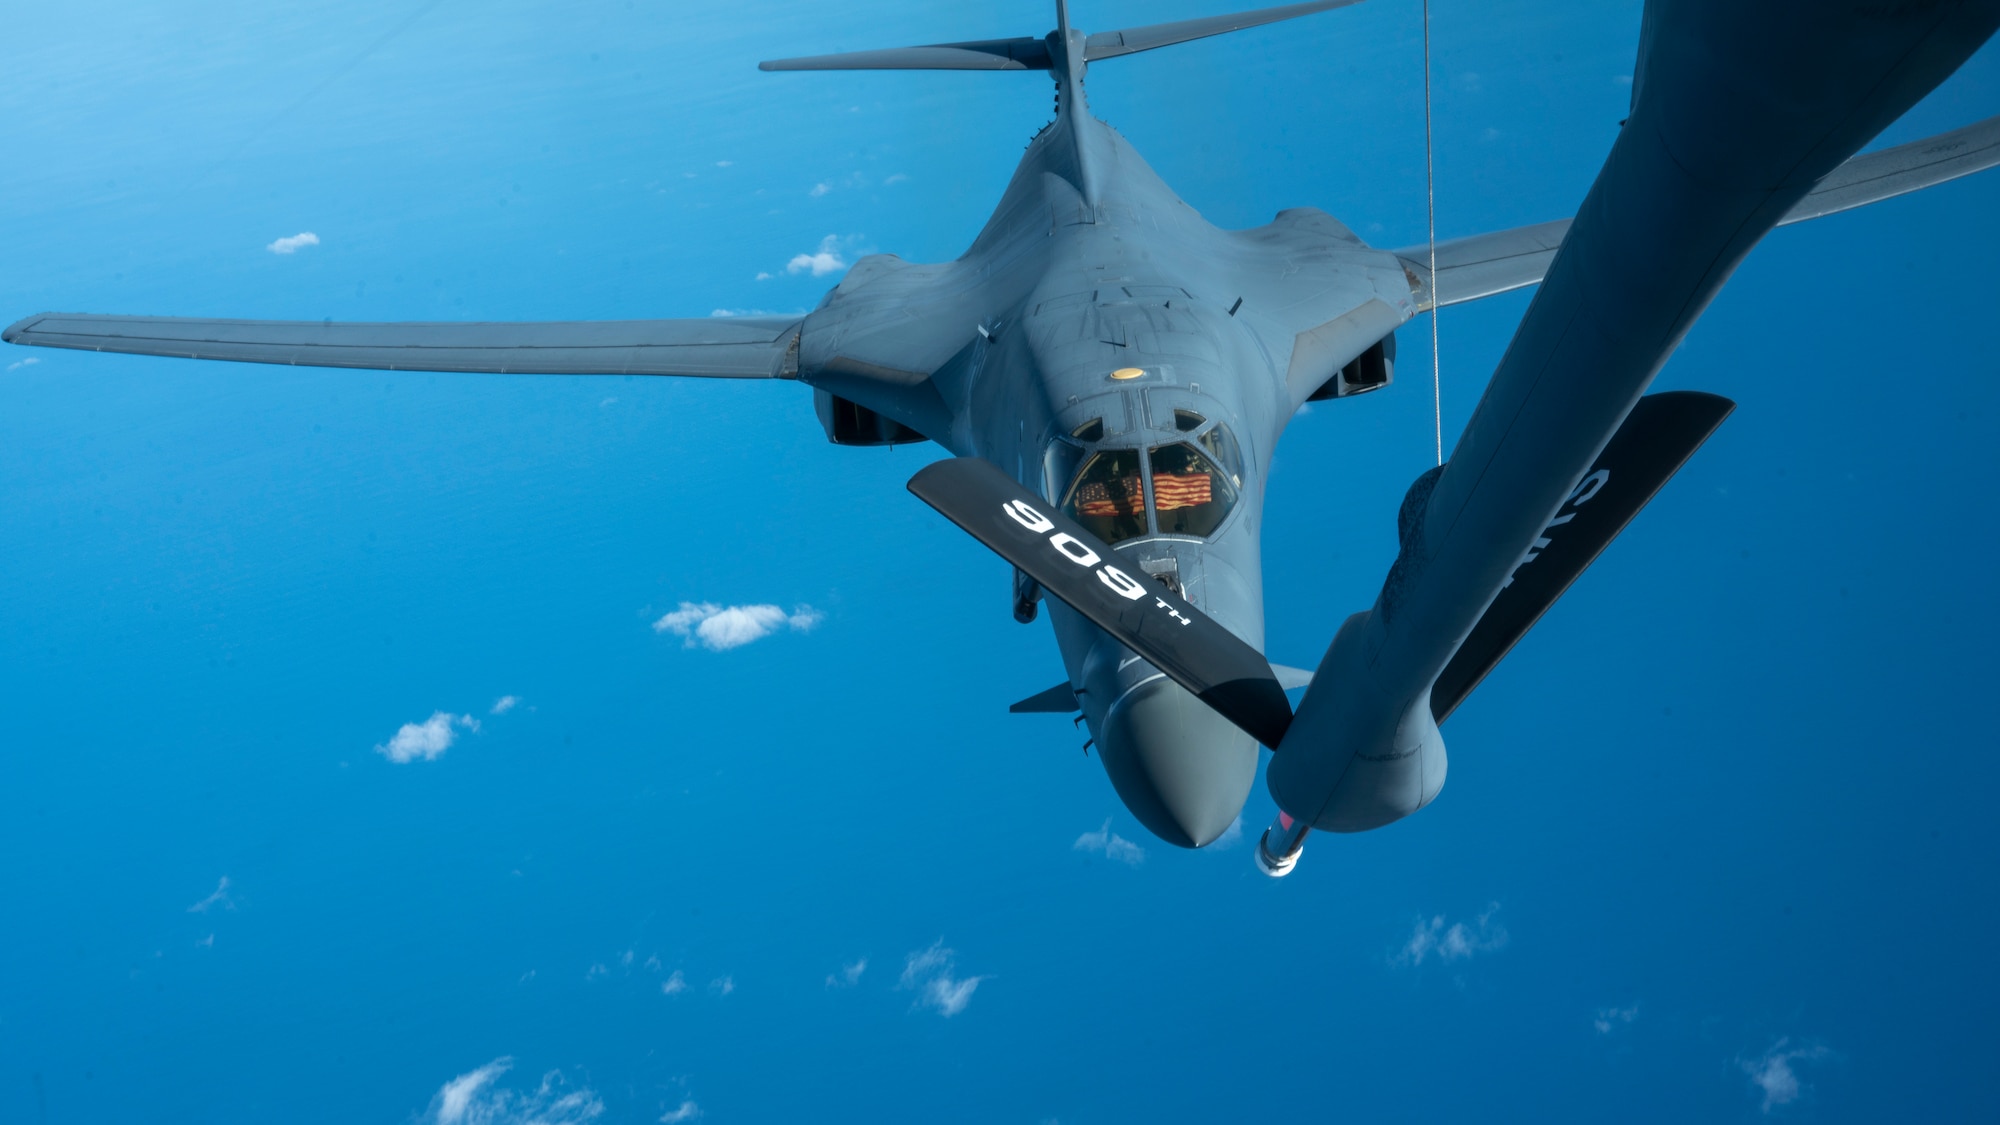 A B-1B Lancer from the 7th Bomber Wing, Dyess Air Force Base, Texas, prepares to receive fuel from a KC-135R Stratotanker over the Pacific Ocean during a Bomber Task Force mission, Jan. 11, 2022. During the mission, the B-1 integrated with Japan Air Self-Defense Force aircraft to conduct intercept, formation and navigation training. (U.S. Air Force photo by Airman 1st Class Moses Taylor)